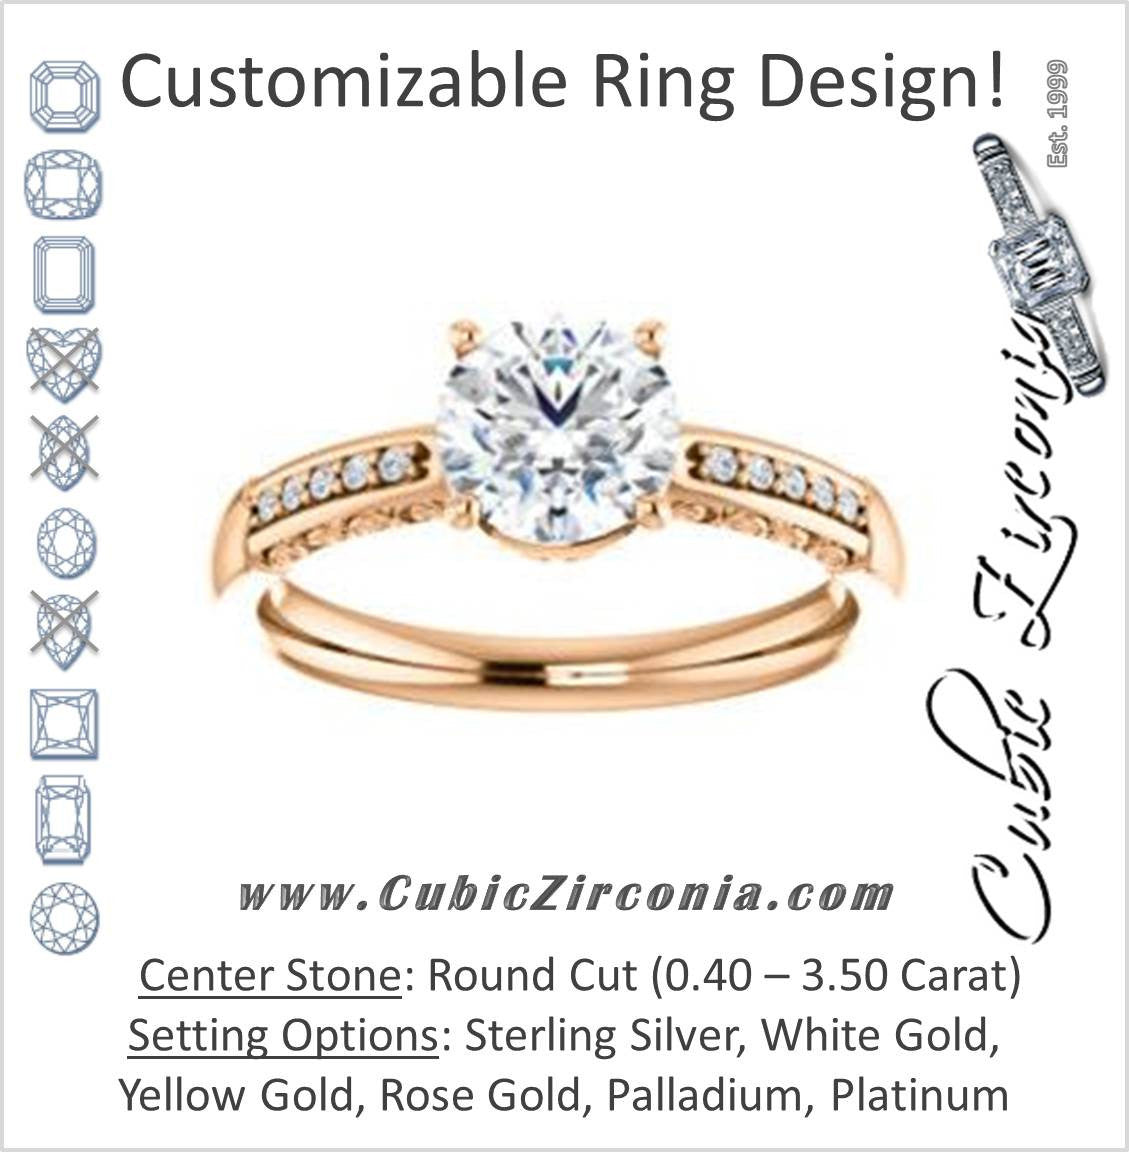 Cubic Zirconia Engagement Ring- The Shantya (Customizable 11-stone Round Cut Design with Round Accents & Delicate Filigree)